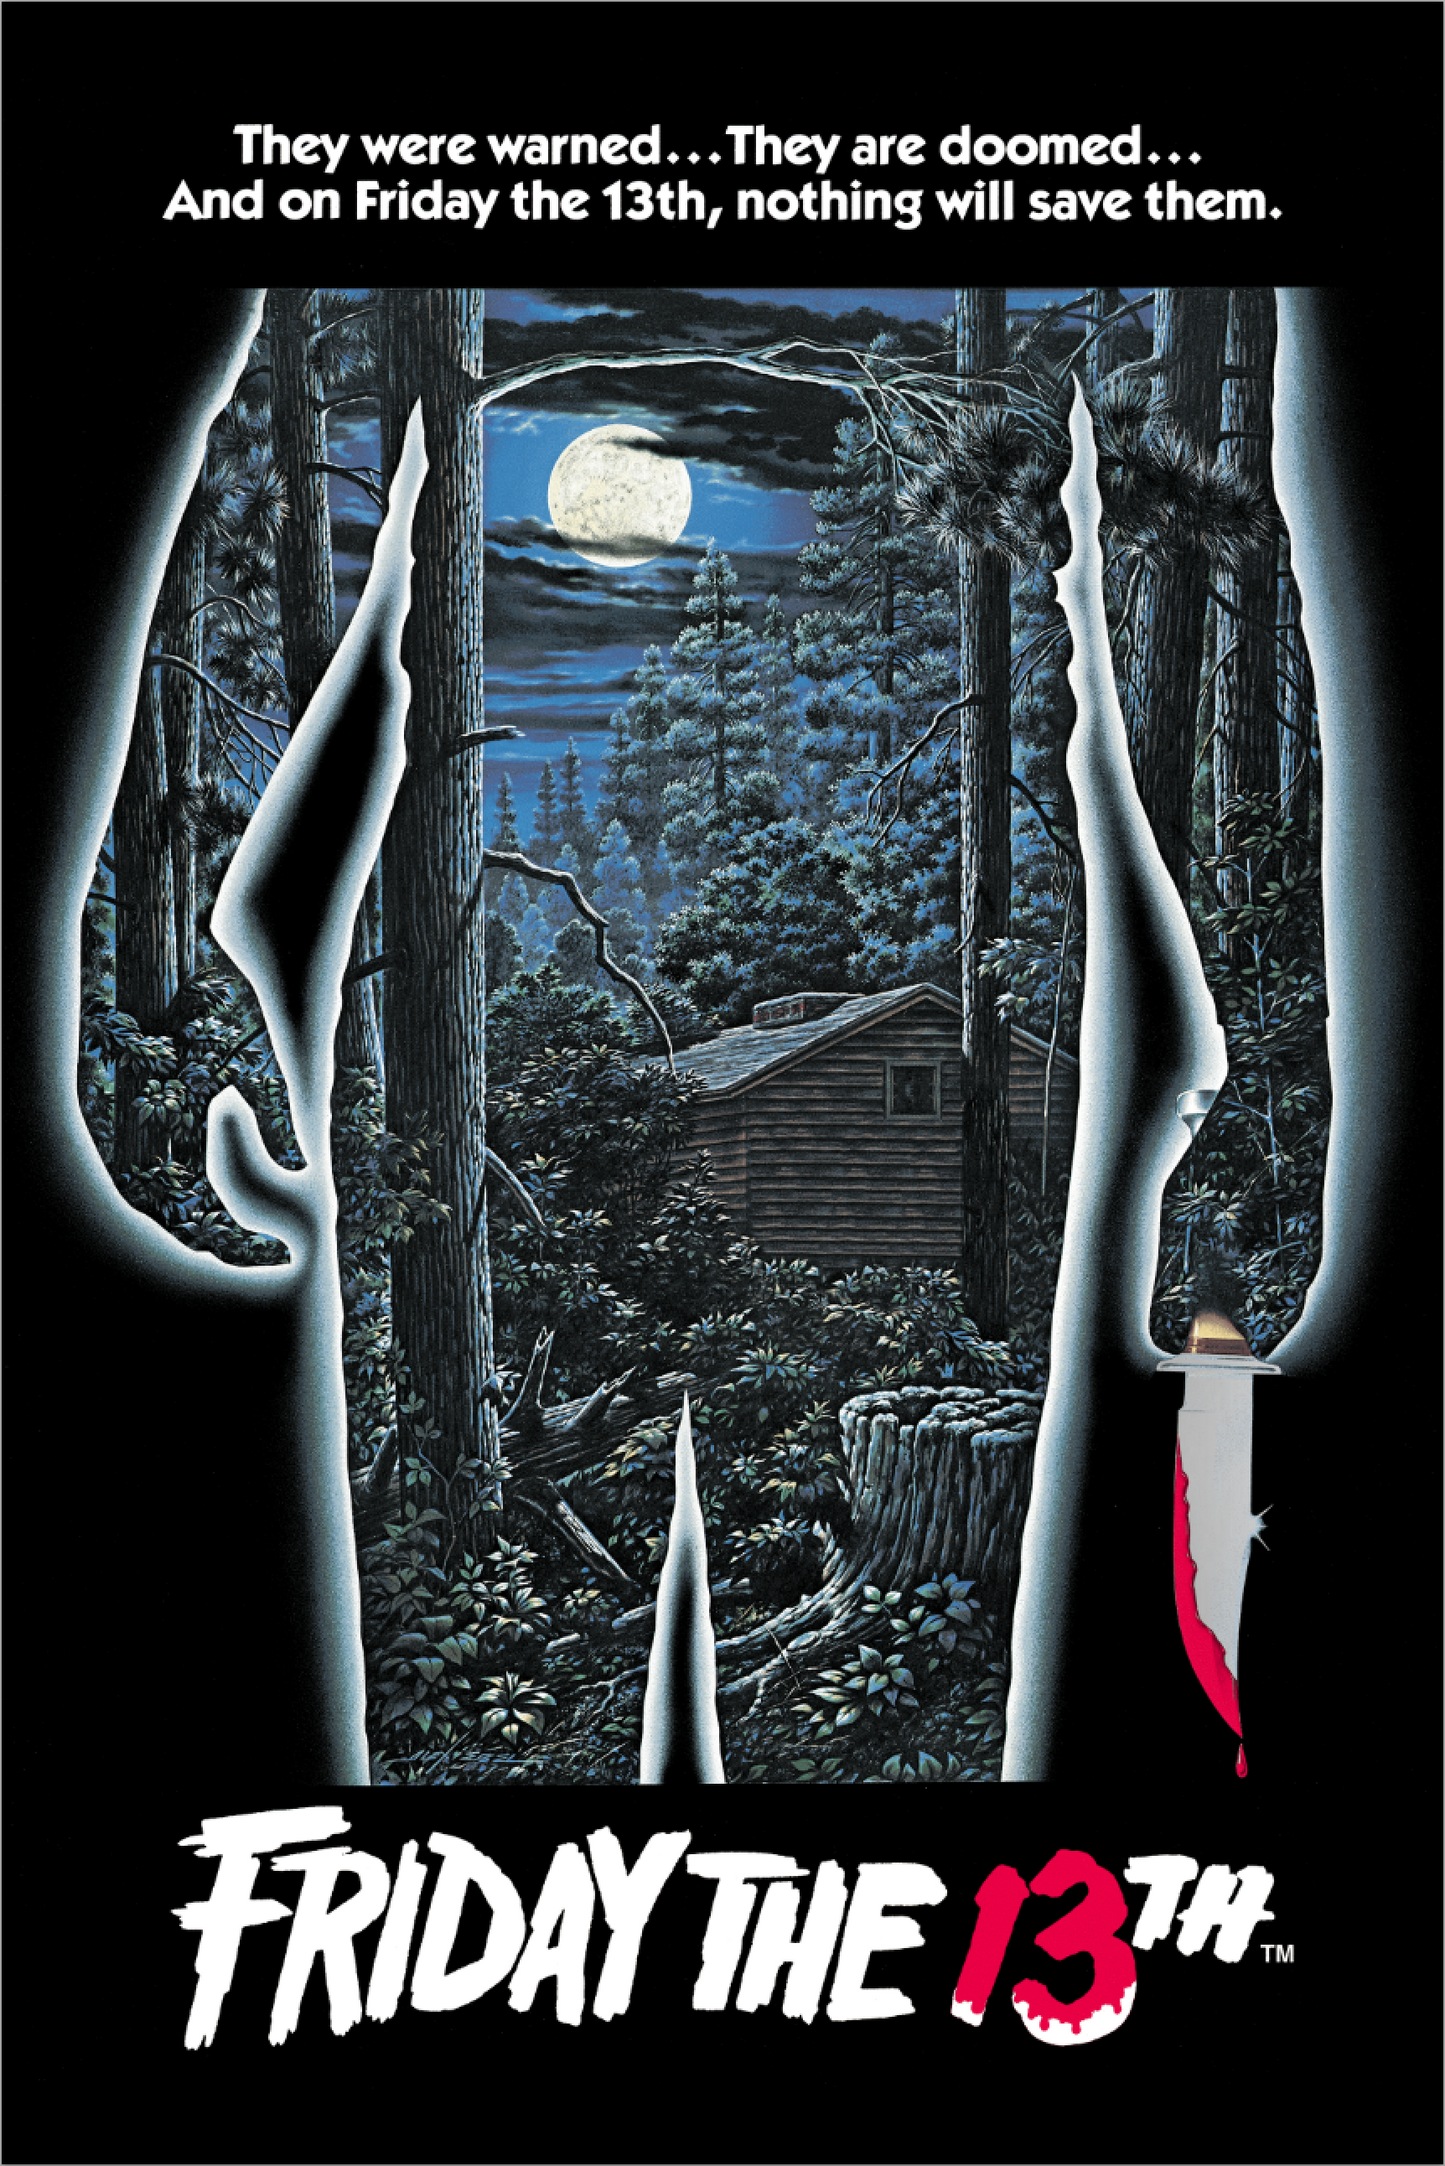 Spiros Angelikas "Friday the 13th" Foil Variant